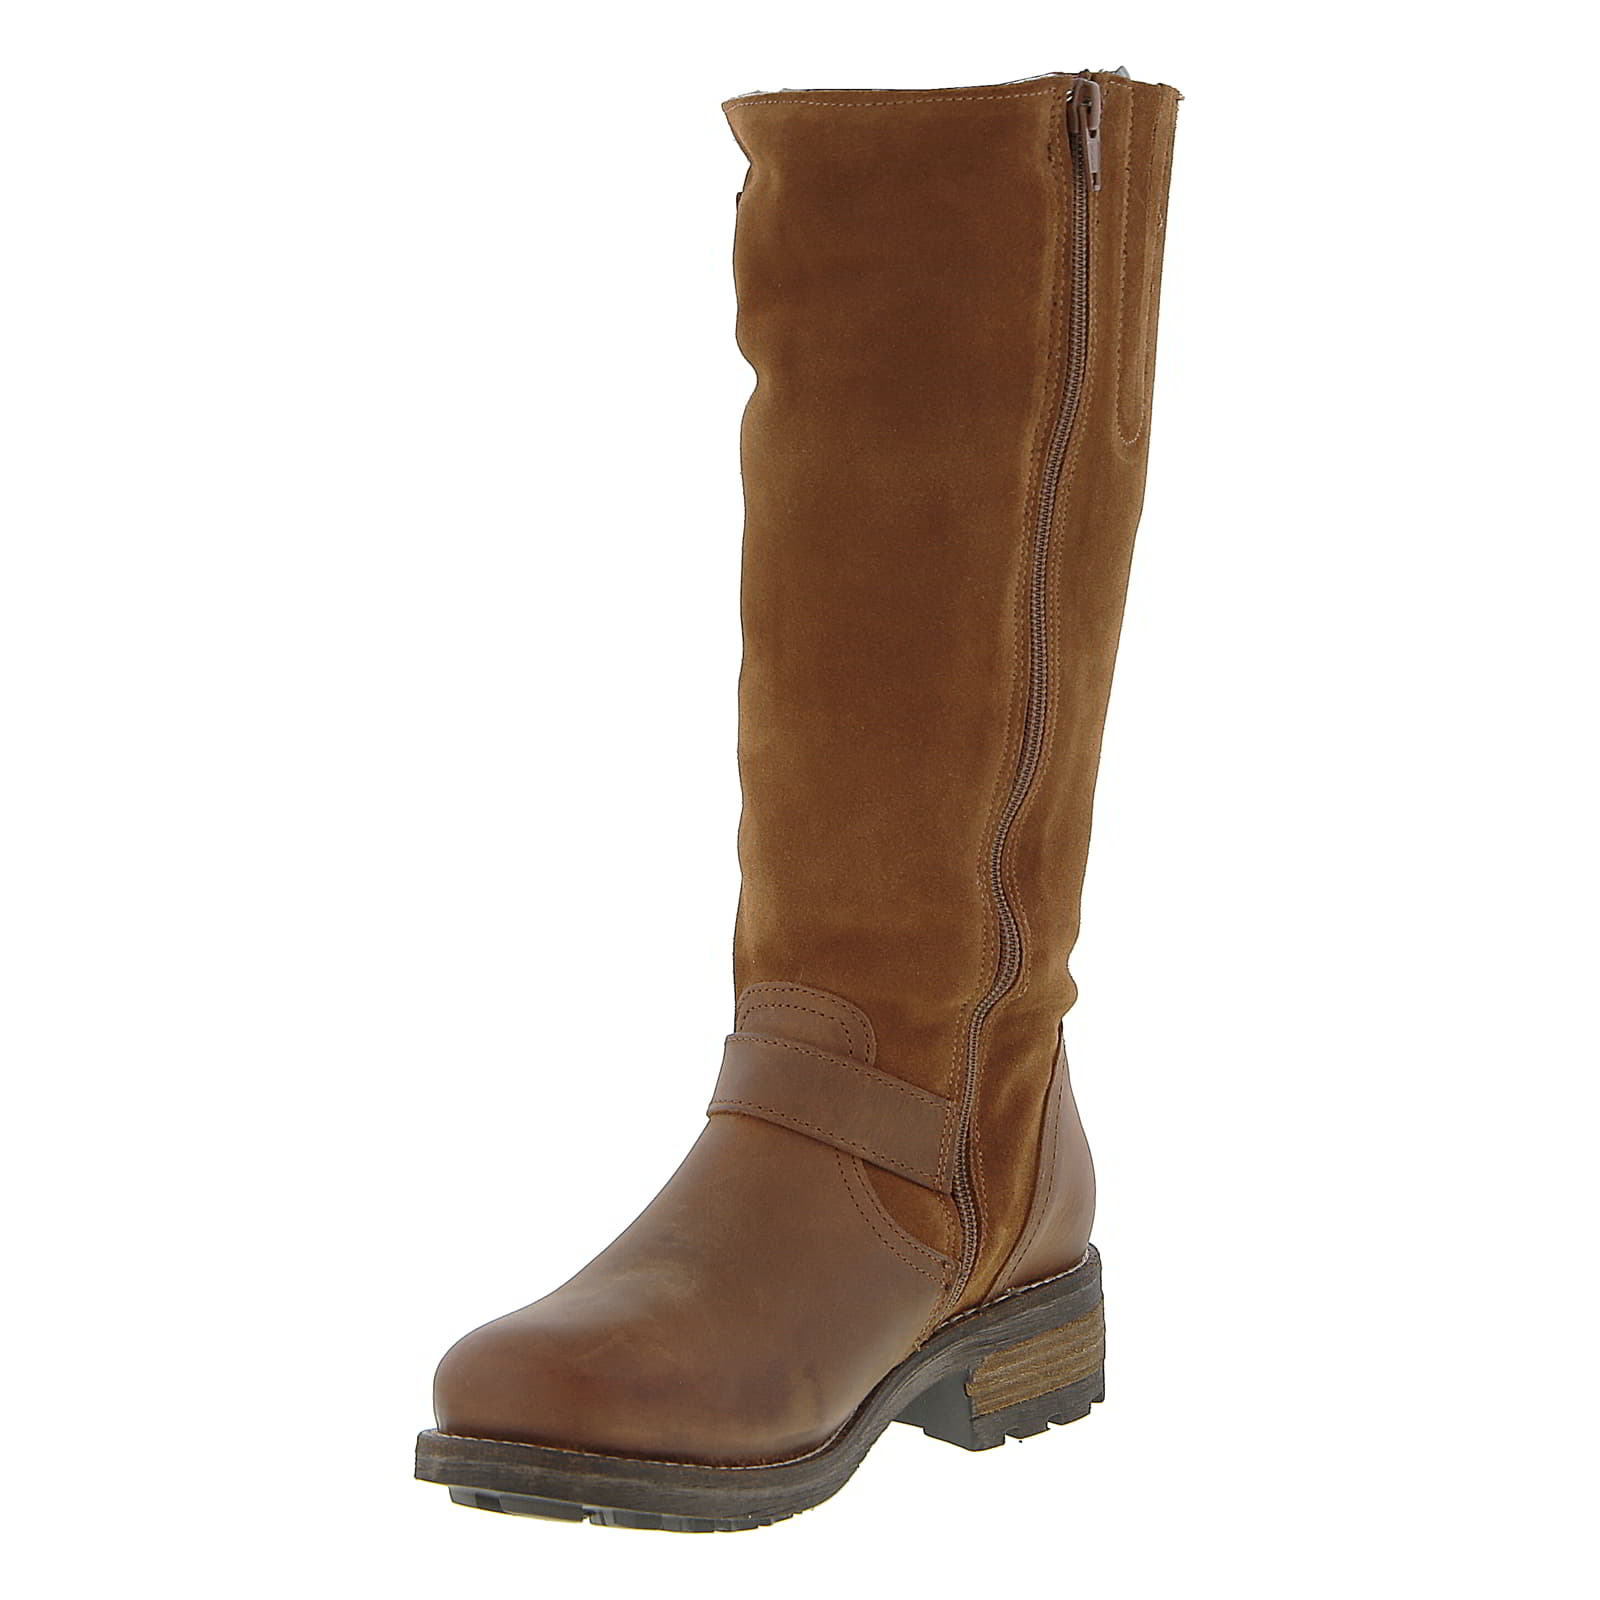 Womens Bridge Fur Lined Tall Country Boots - Cognac